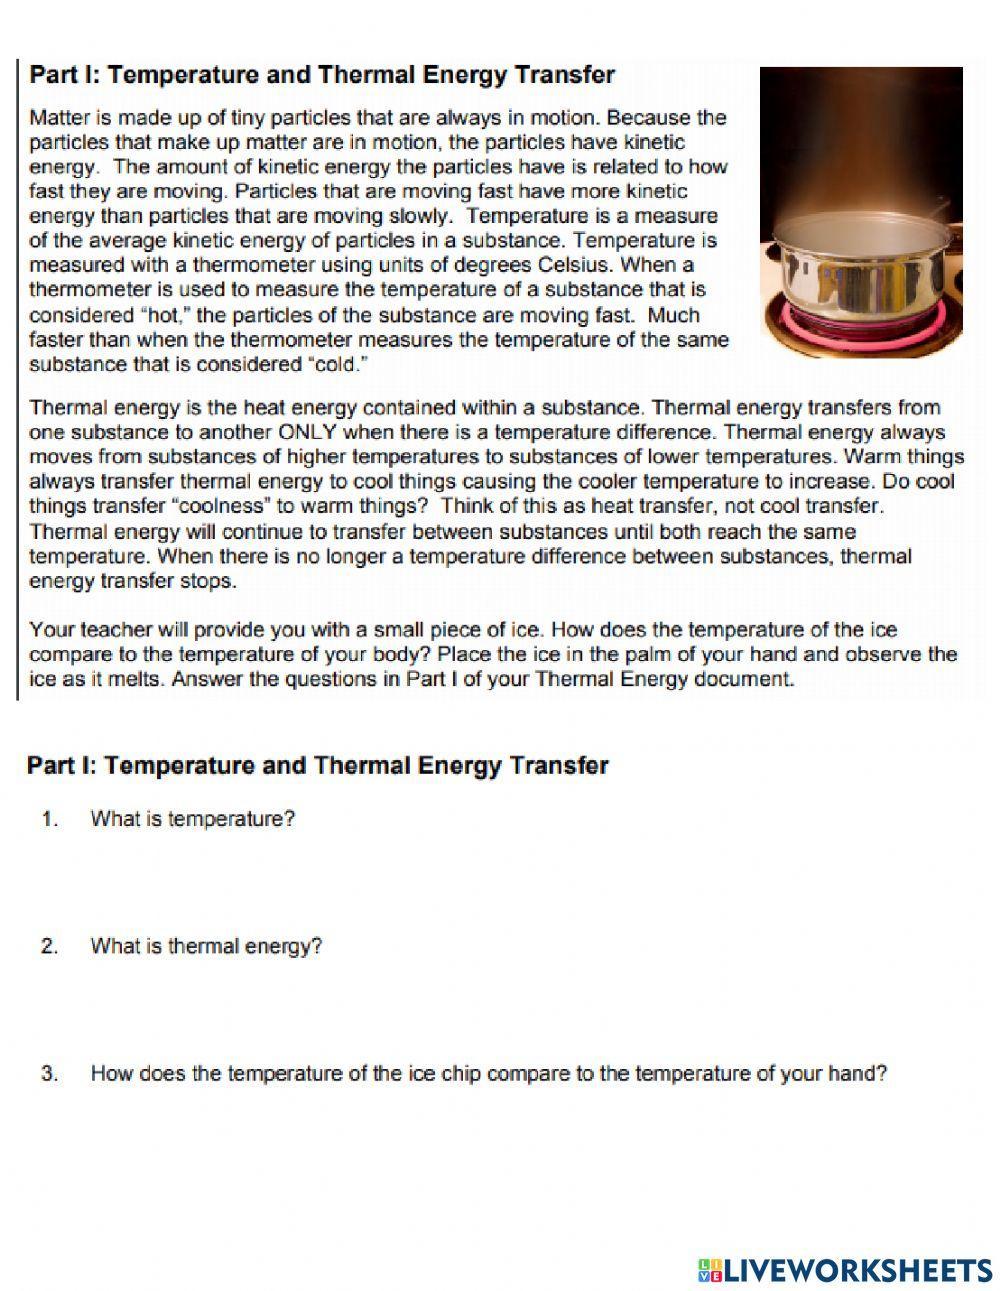 May 21-24 Part 1: Temps and Thermal Energy